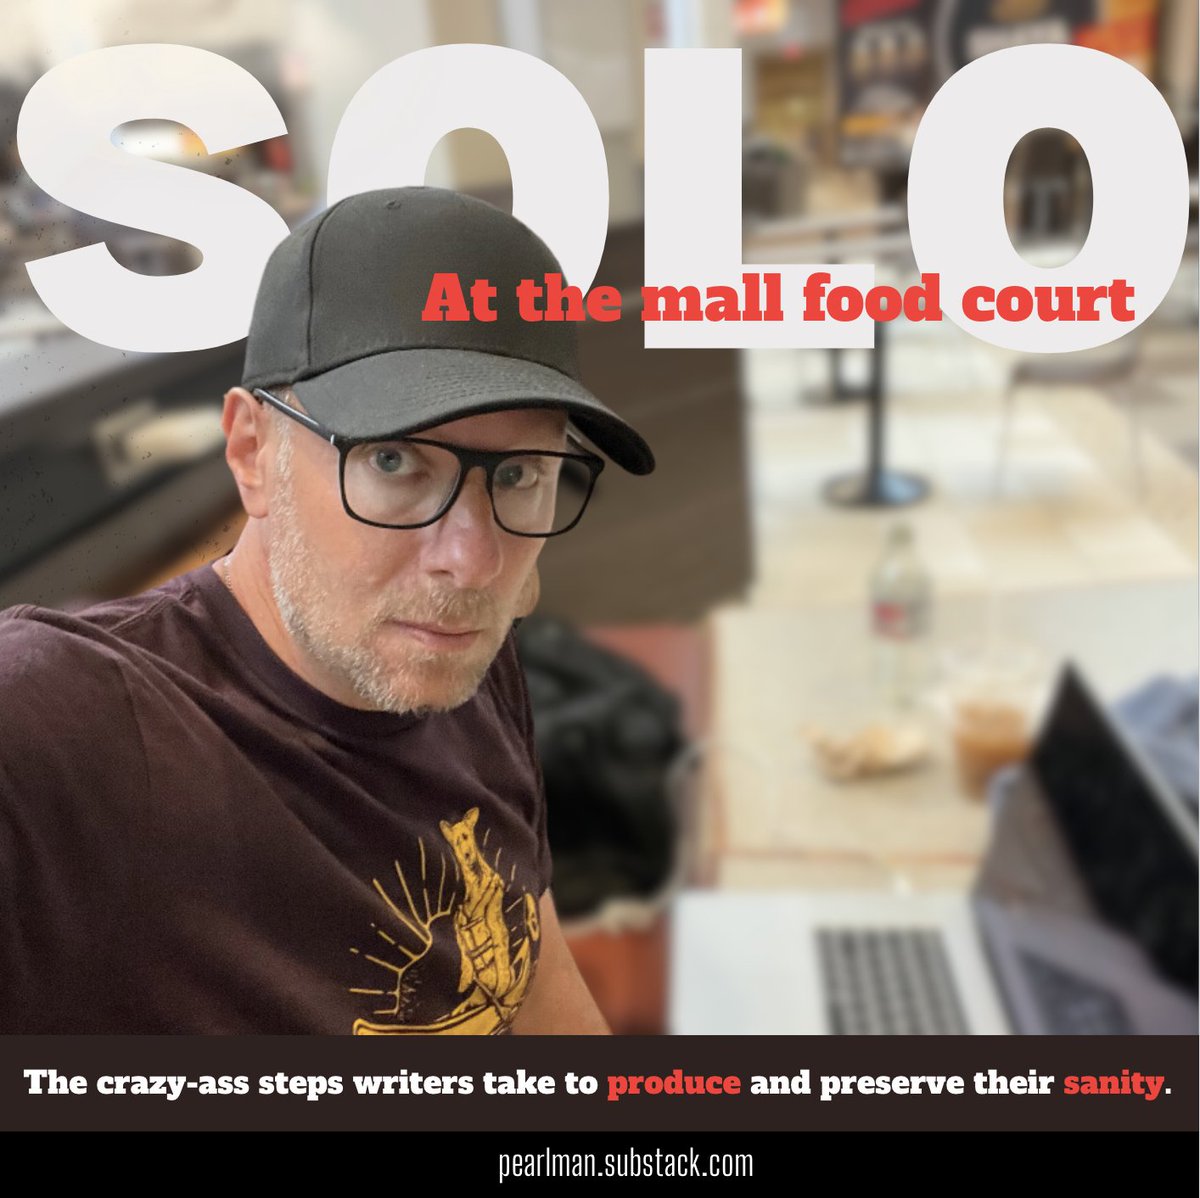 New Pearlman Journalism newsletter delves into all the quirky, crazy things writers do ... to write. Co-starring @jemelehill @MikeVacc @MirinFader @Ian_OConnor @jon_wertheim @TheRodneyBarnes @Chris_Ballard33 @bylucaevans @bassab1 @wr_coffey and others shorturl.at/Qp72x